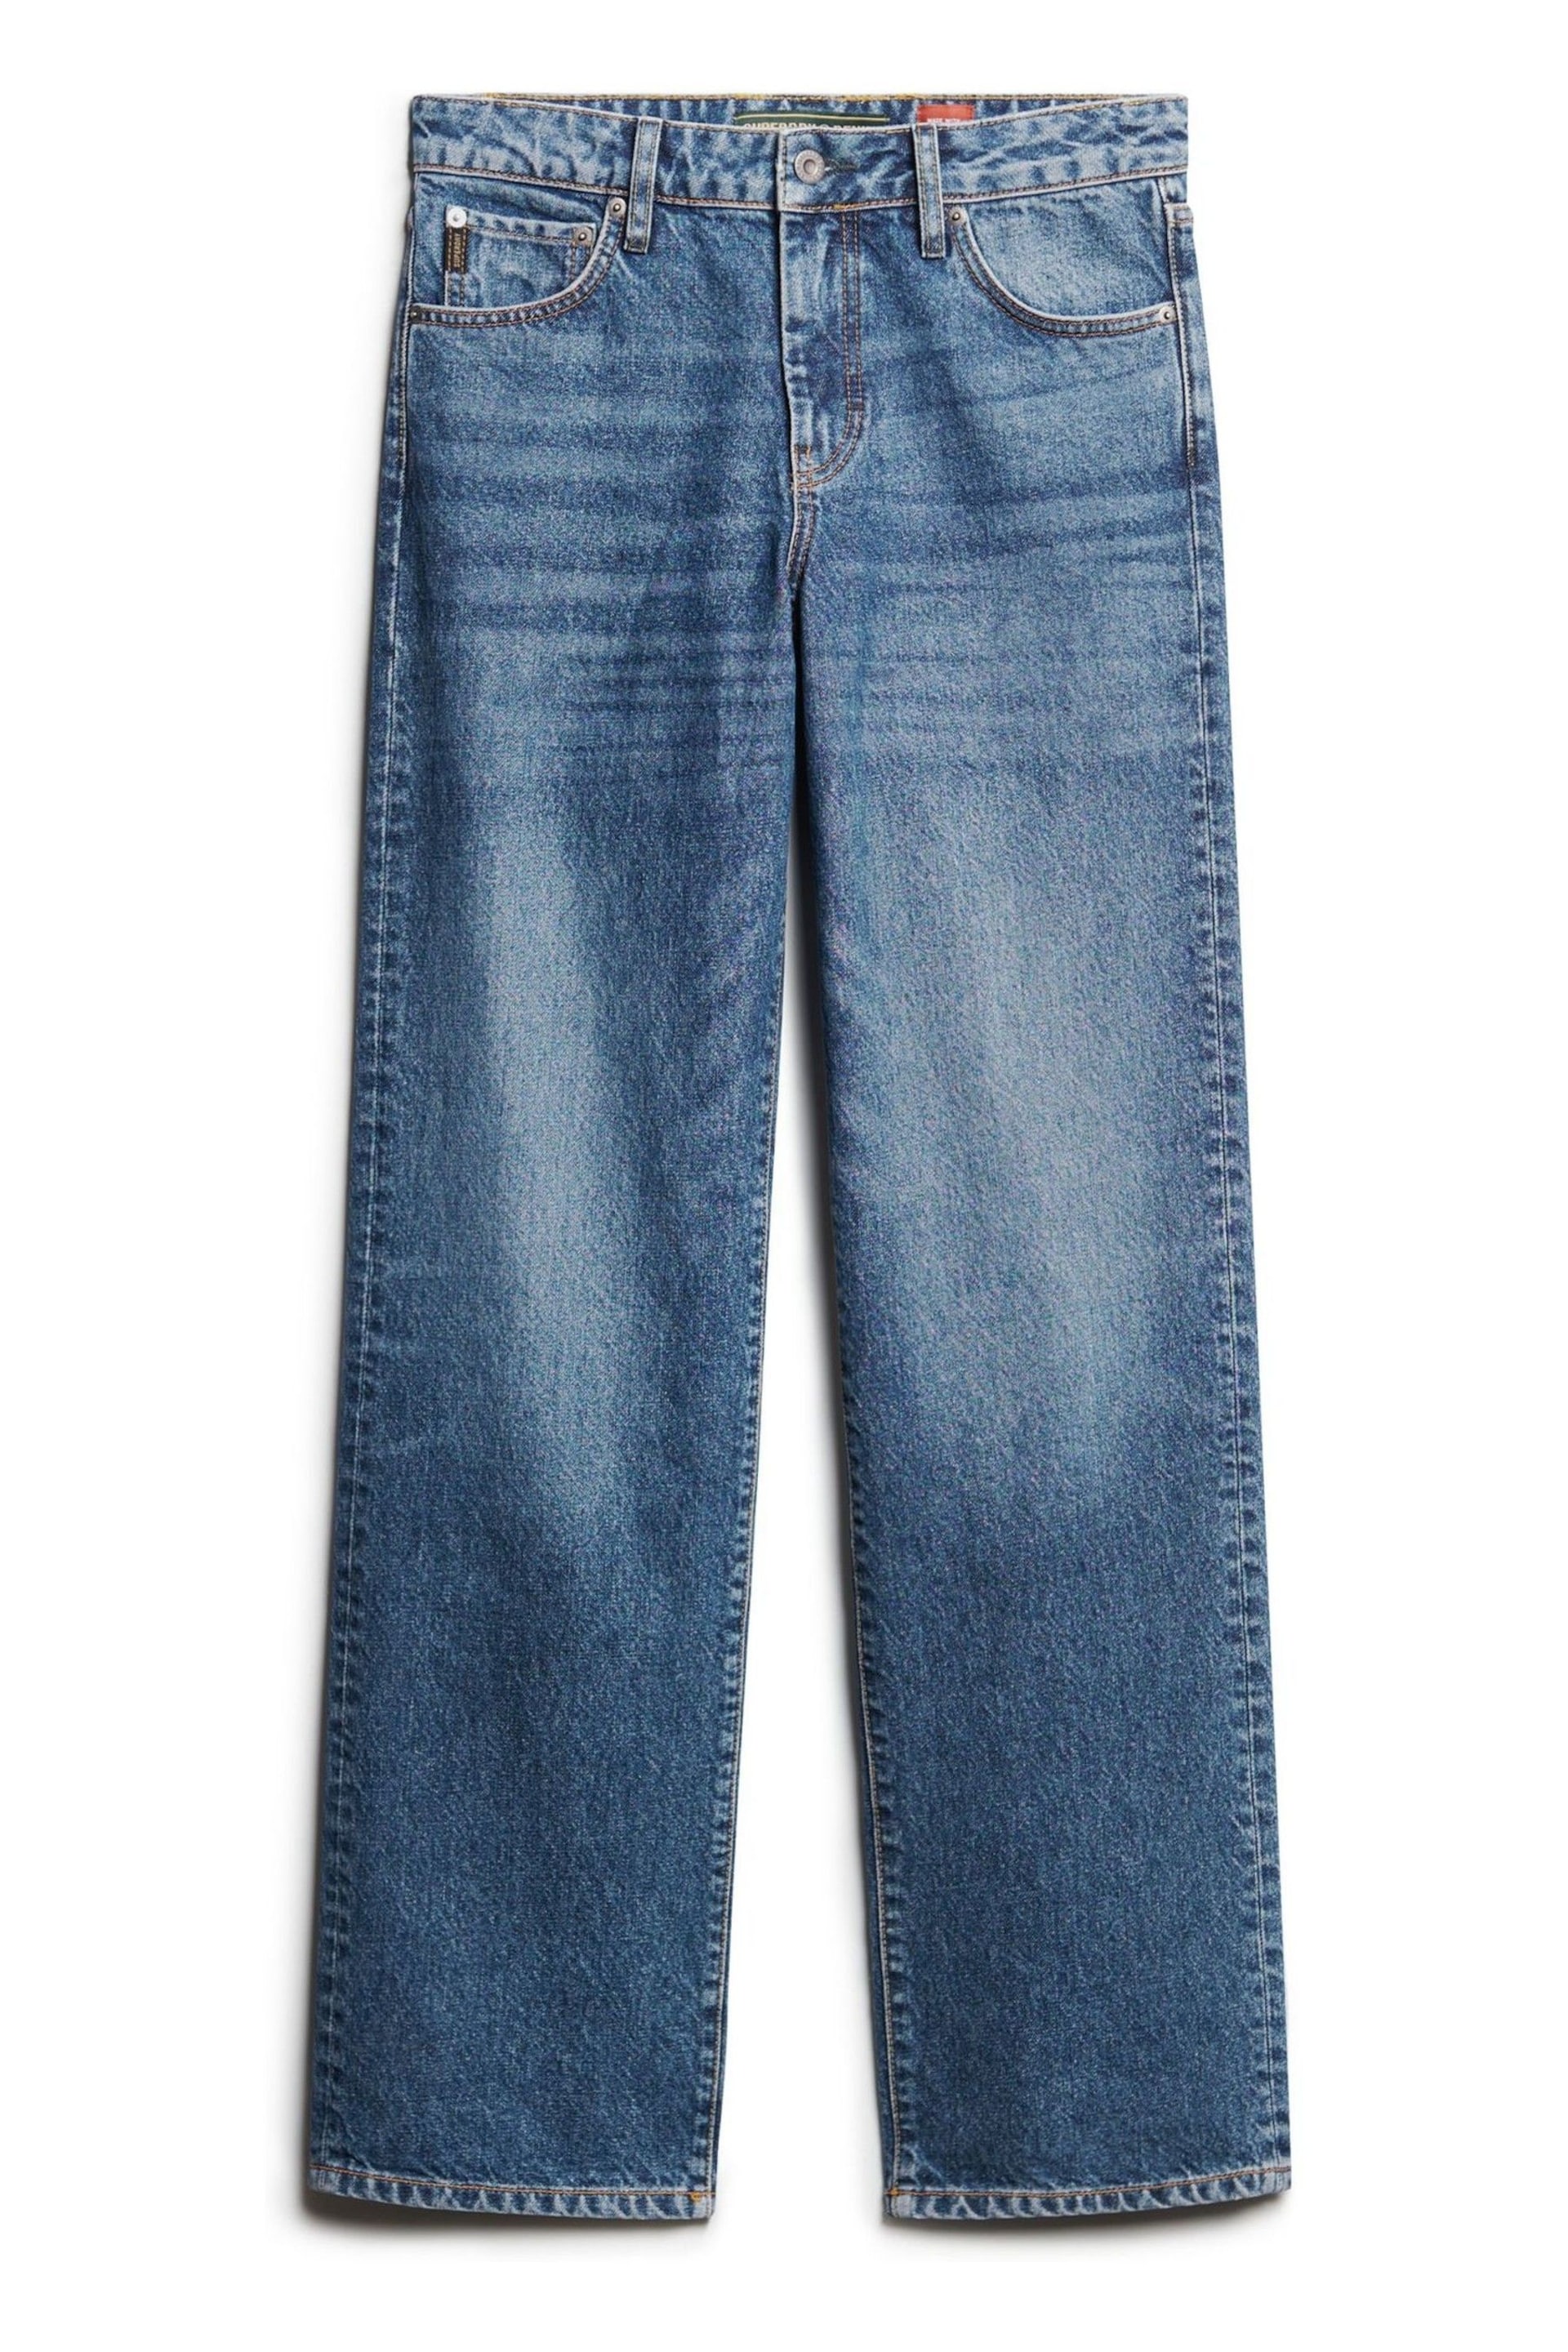 Superdry Blue Mid Rise Wide Leg Jeans - Image 6 of 8